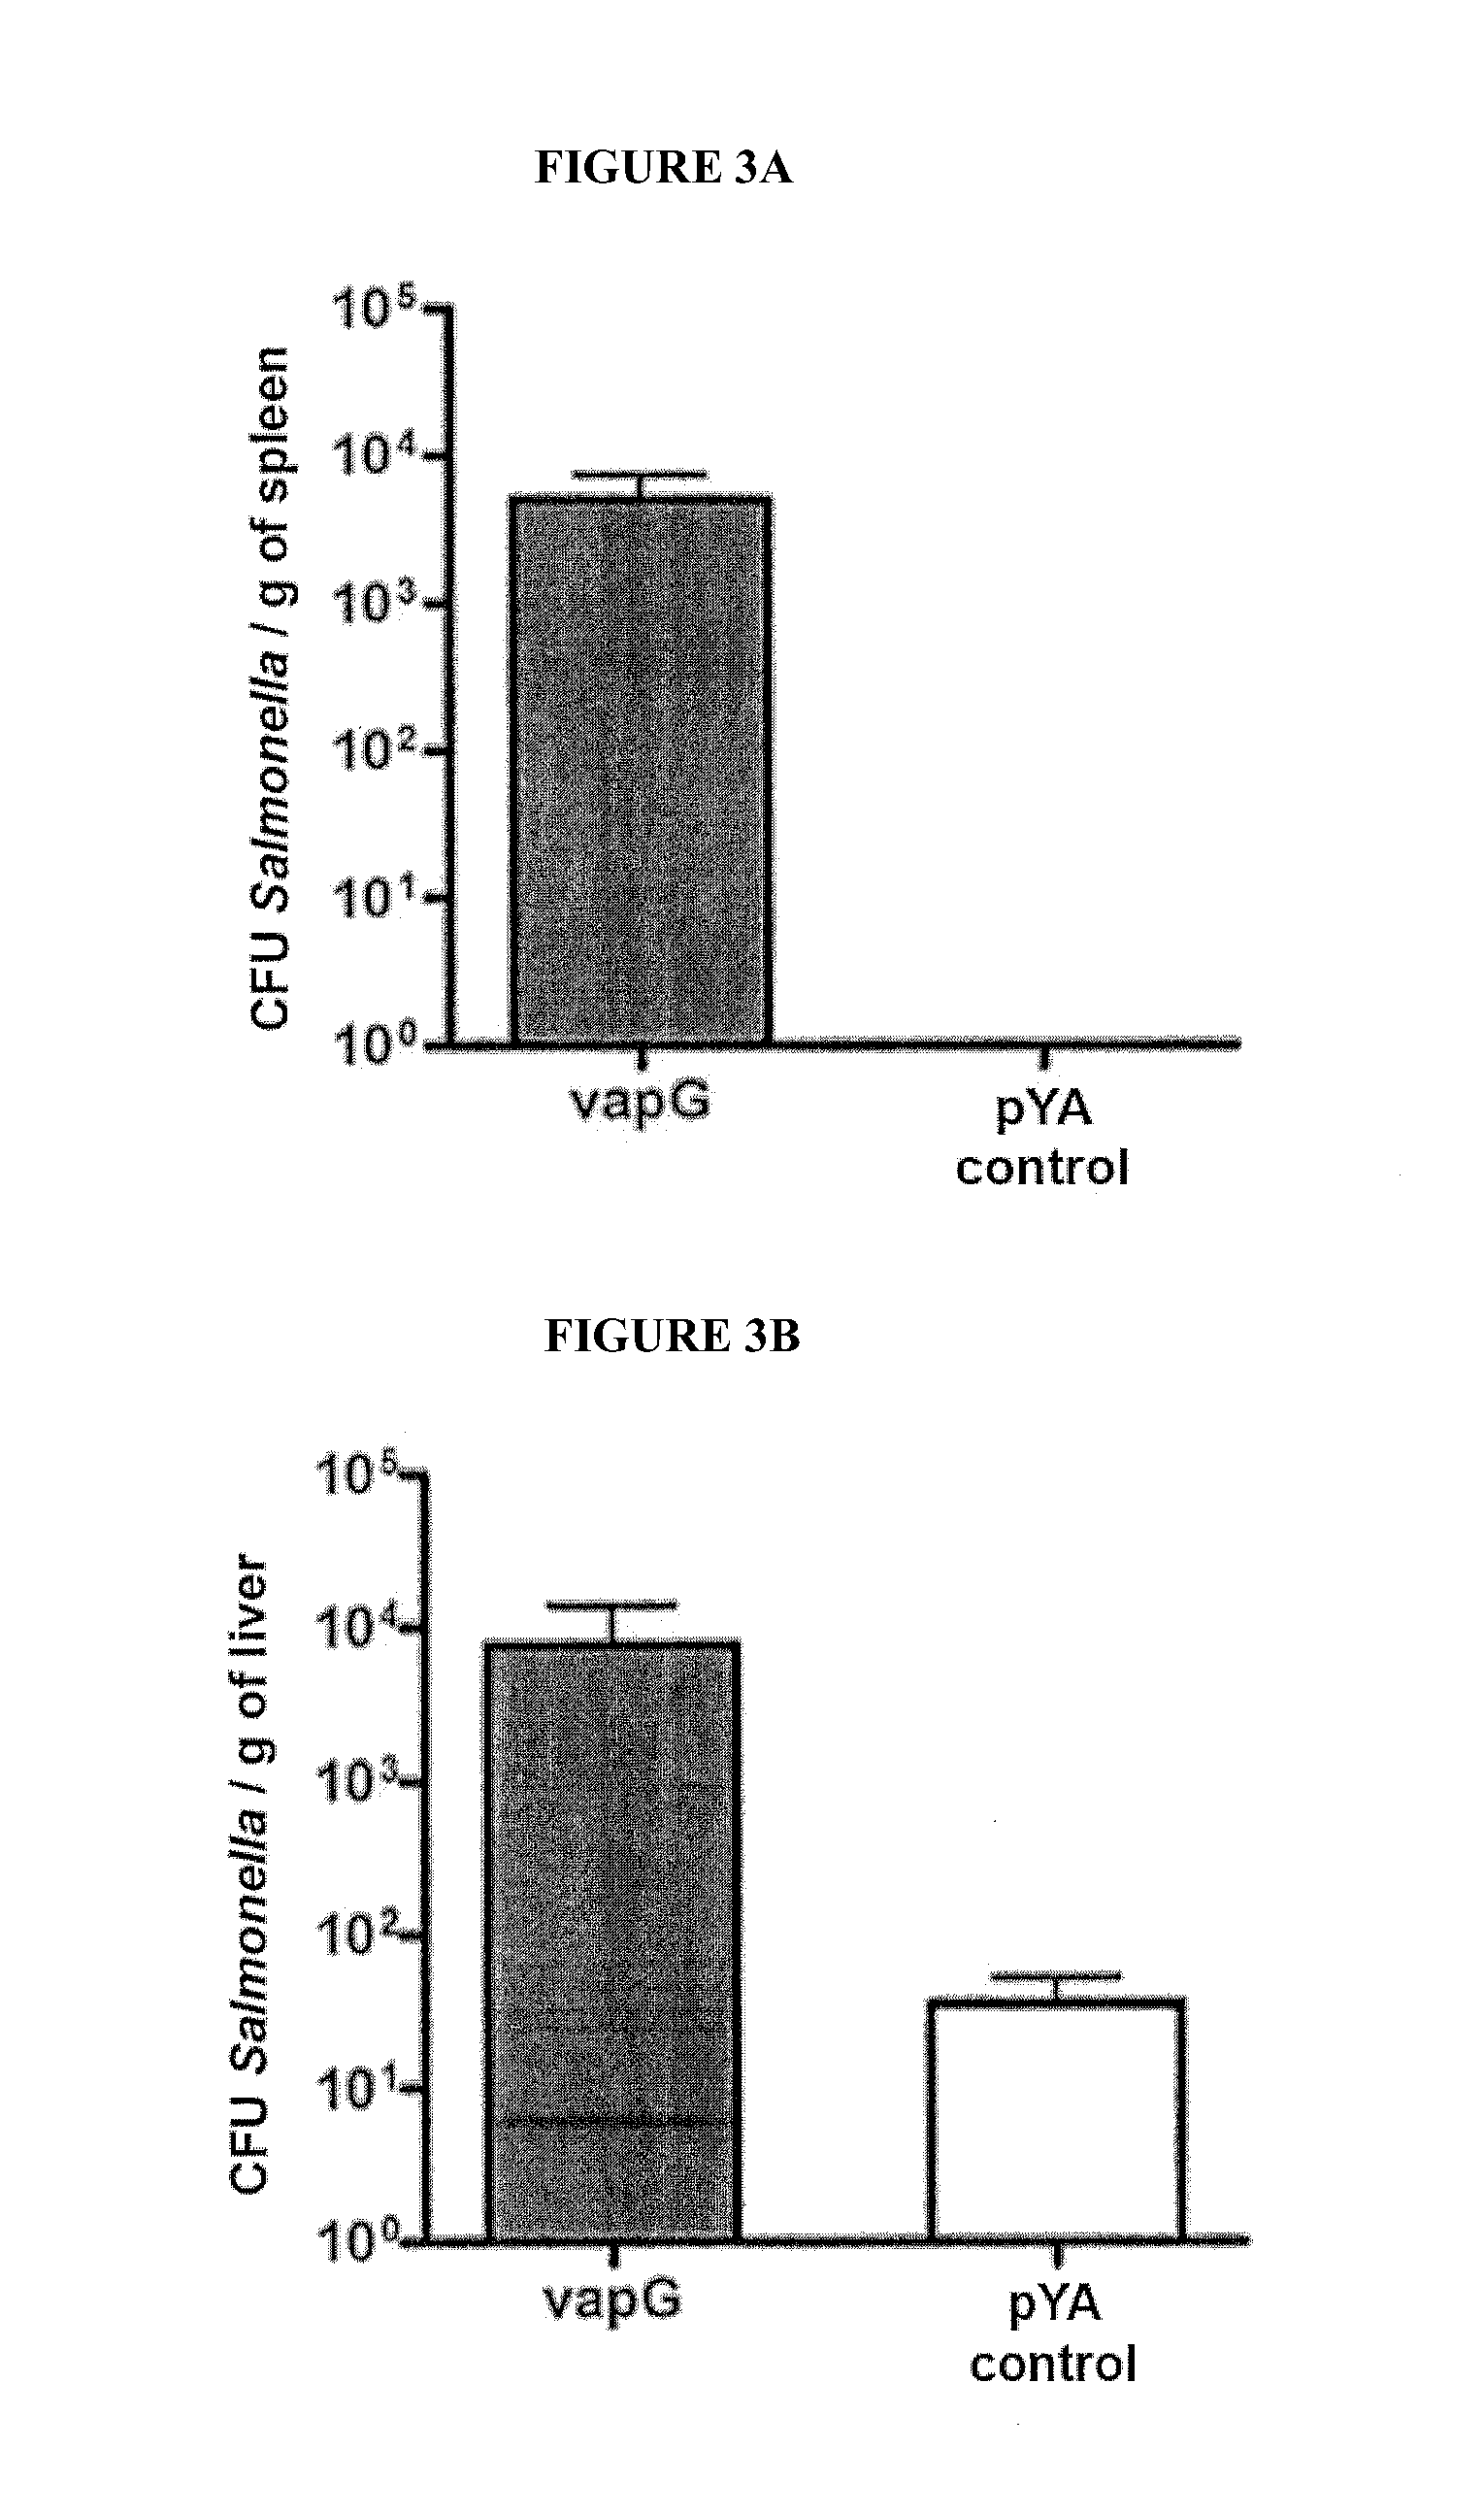 Recombinant microorganisms and uses thereof